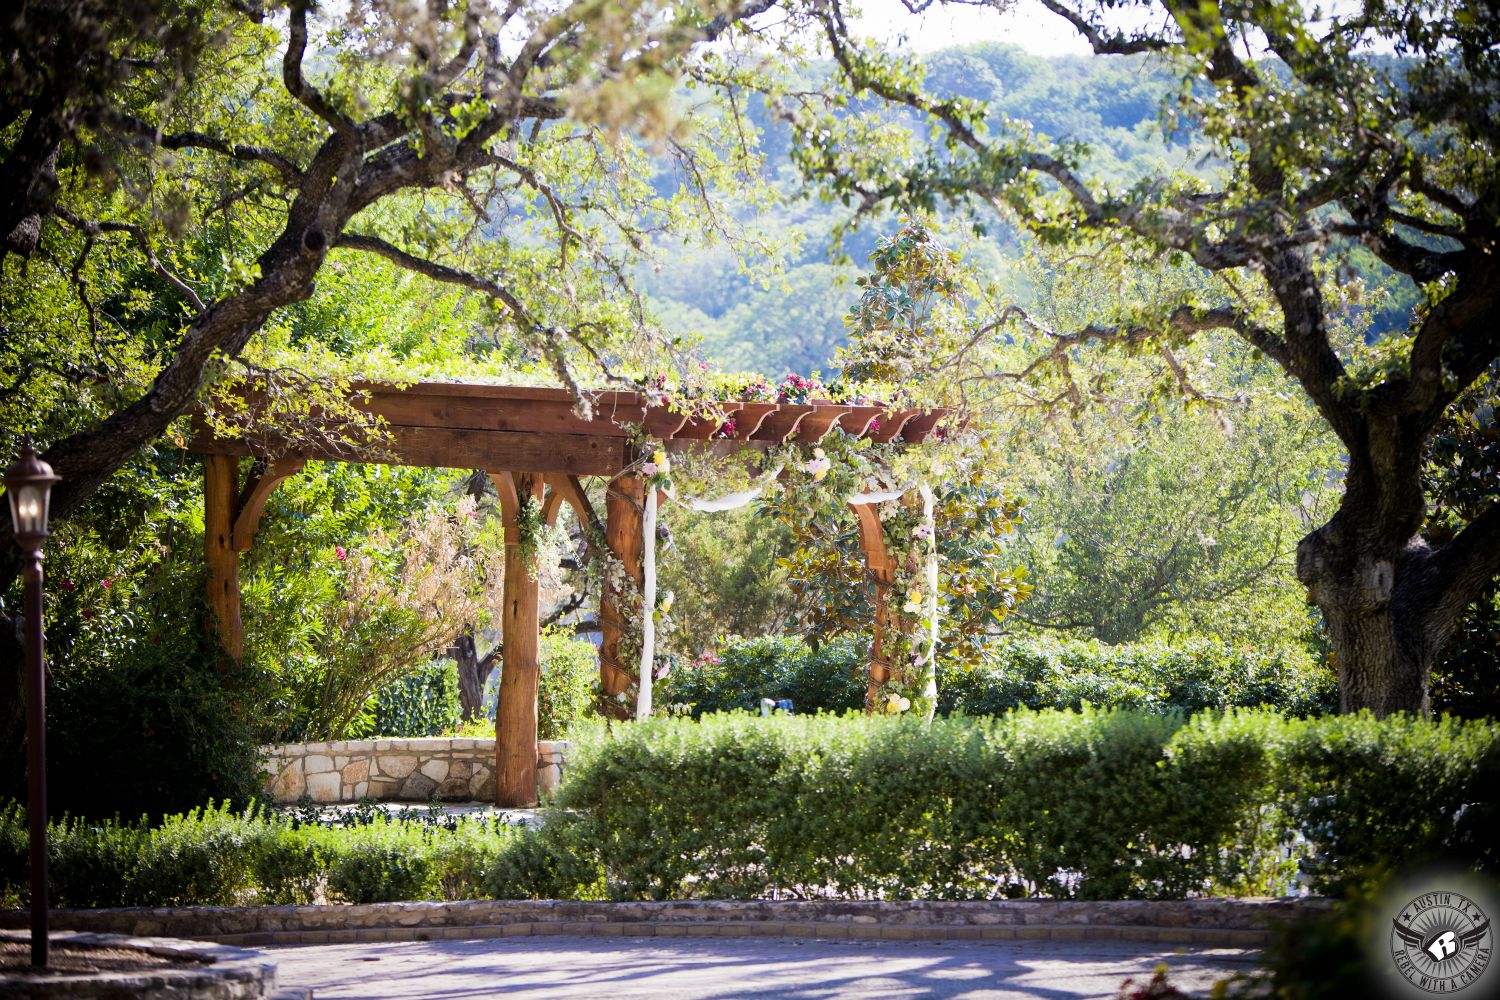 Beautiful arbor covered with flowers at outdoor wedding ceremony site surrounded by towering oak trees at Nature's Point Austin wedding venue on the shores of Lake Travis.